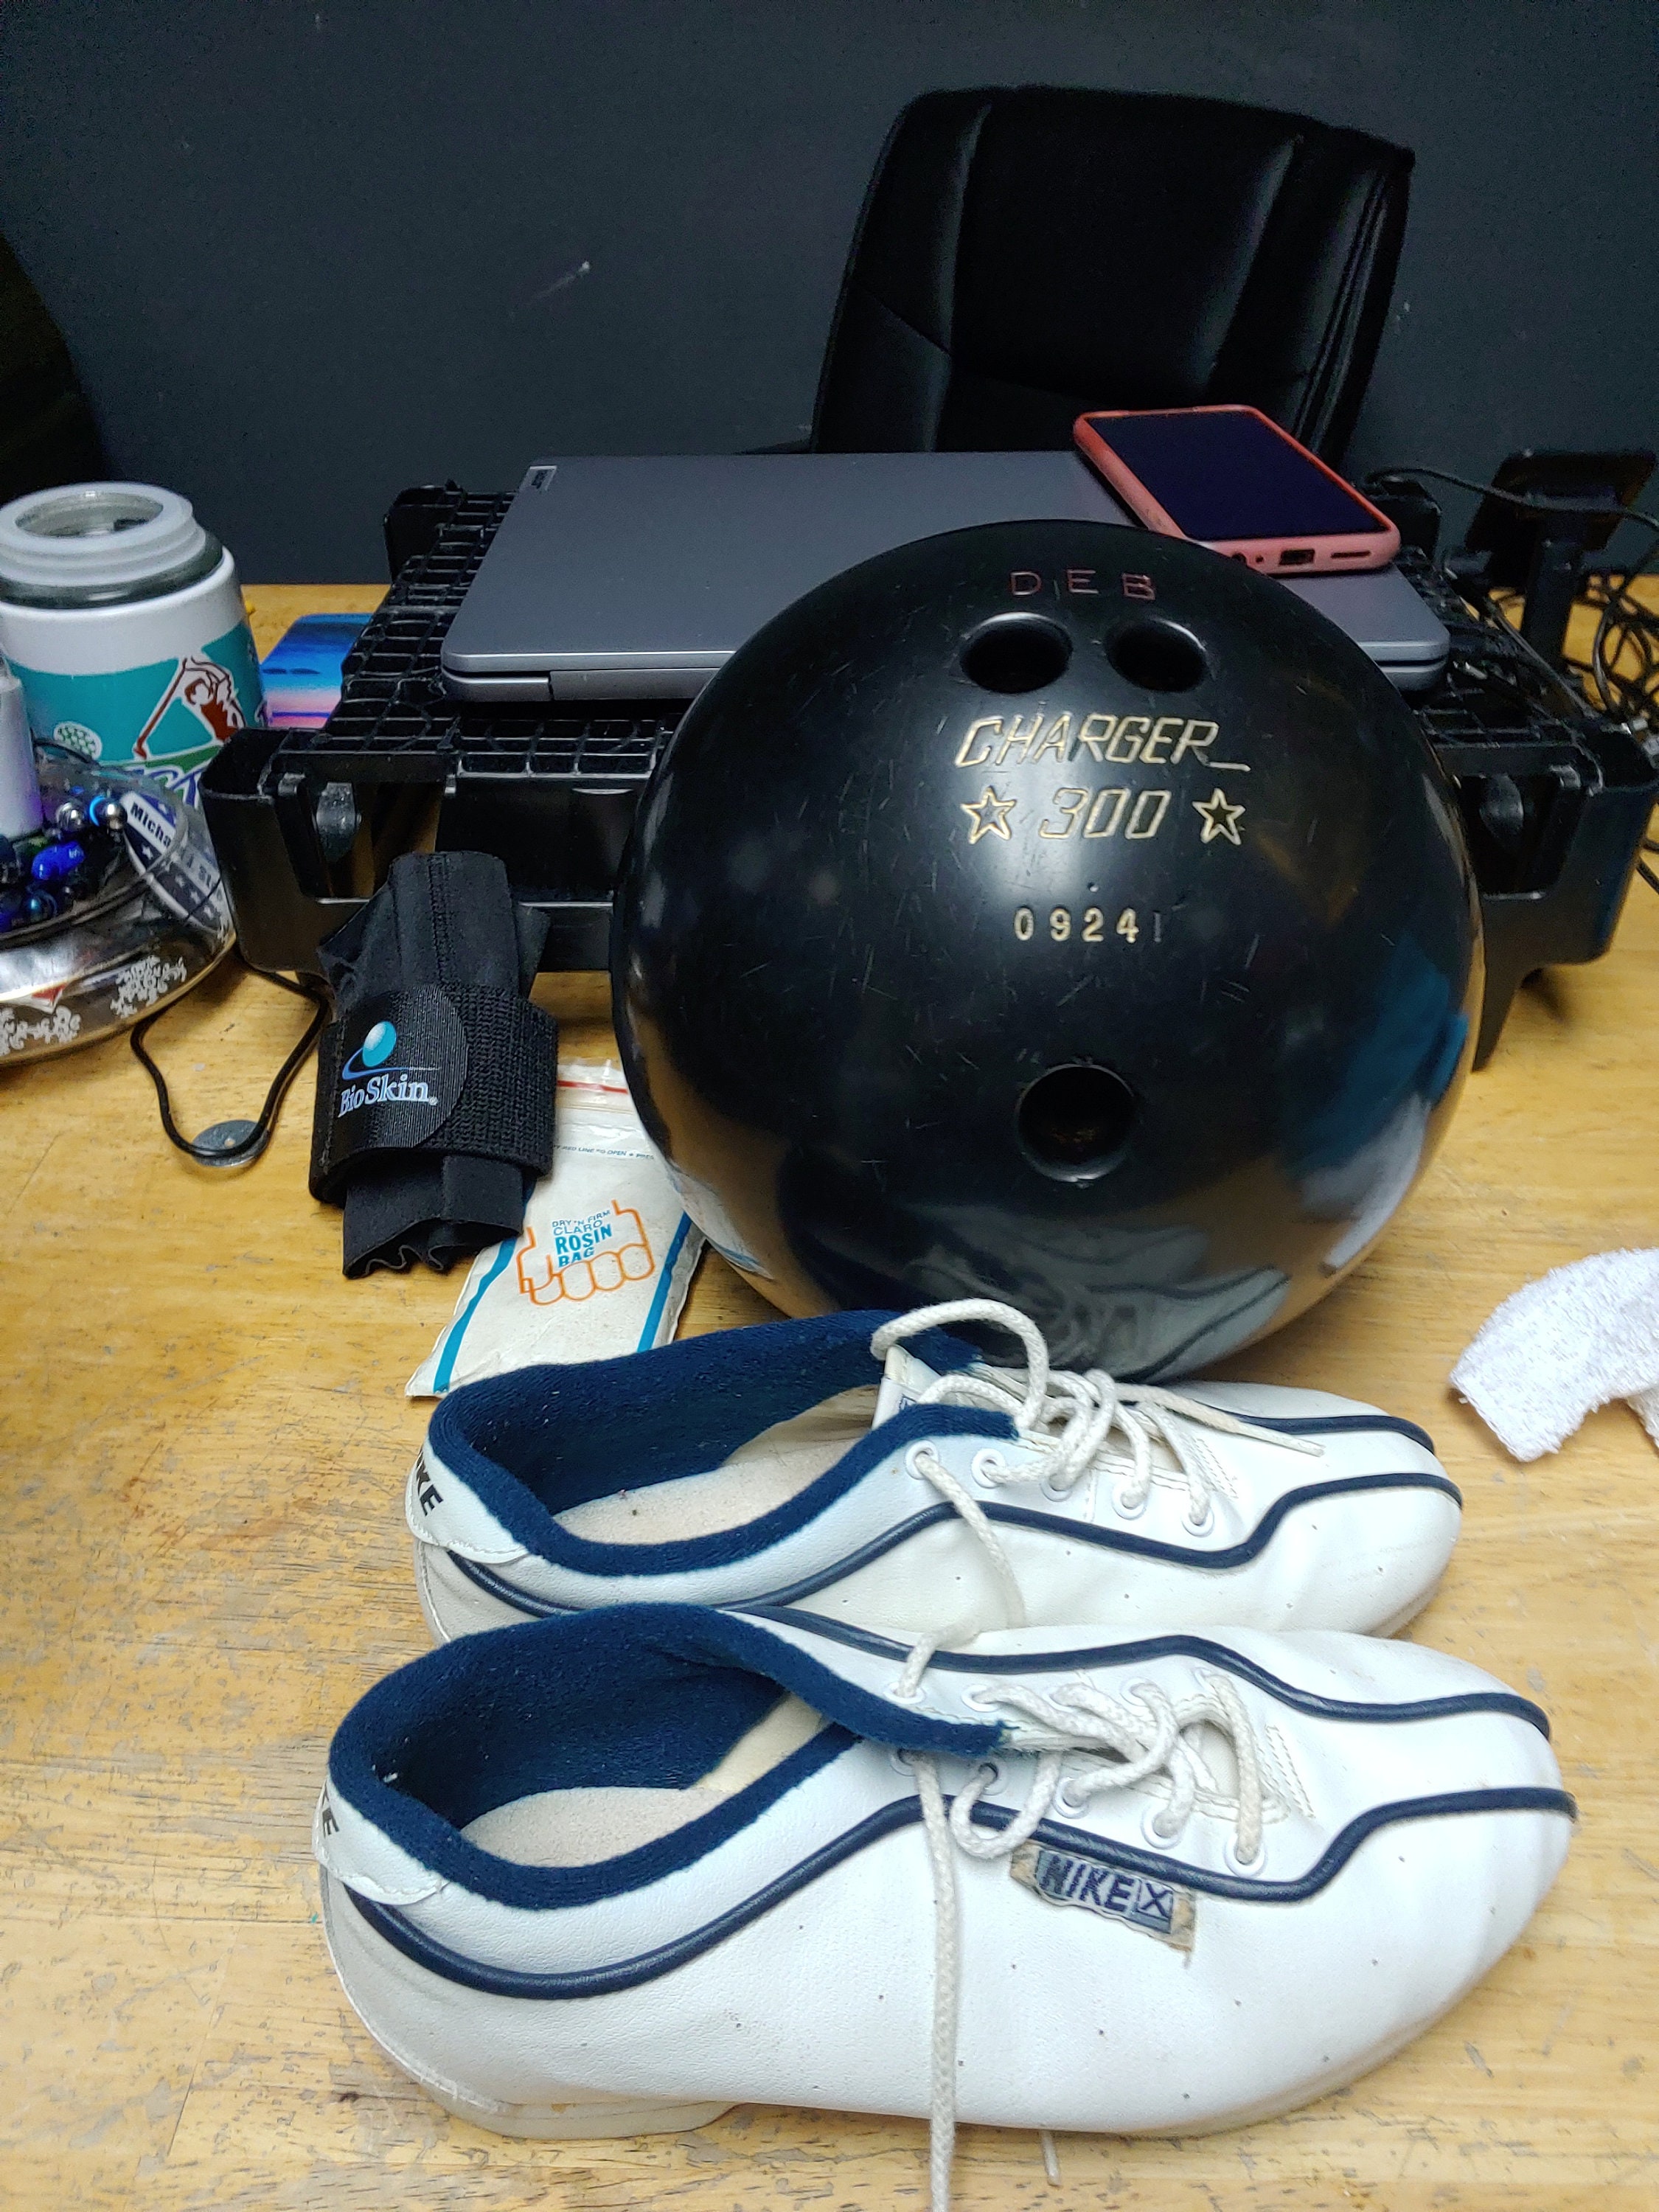 Charger 300 Twelve Pound Bowling Ball With Accessories - Etsy